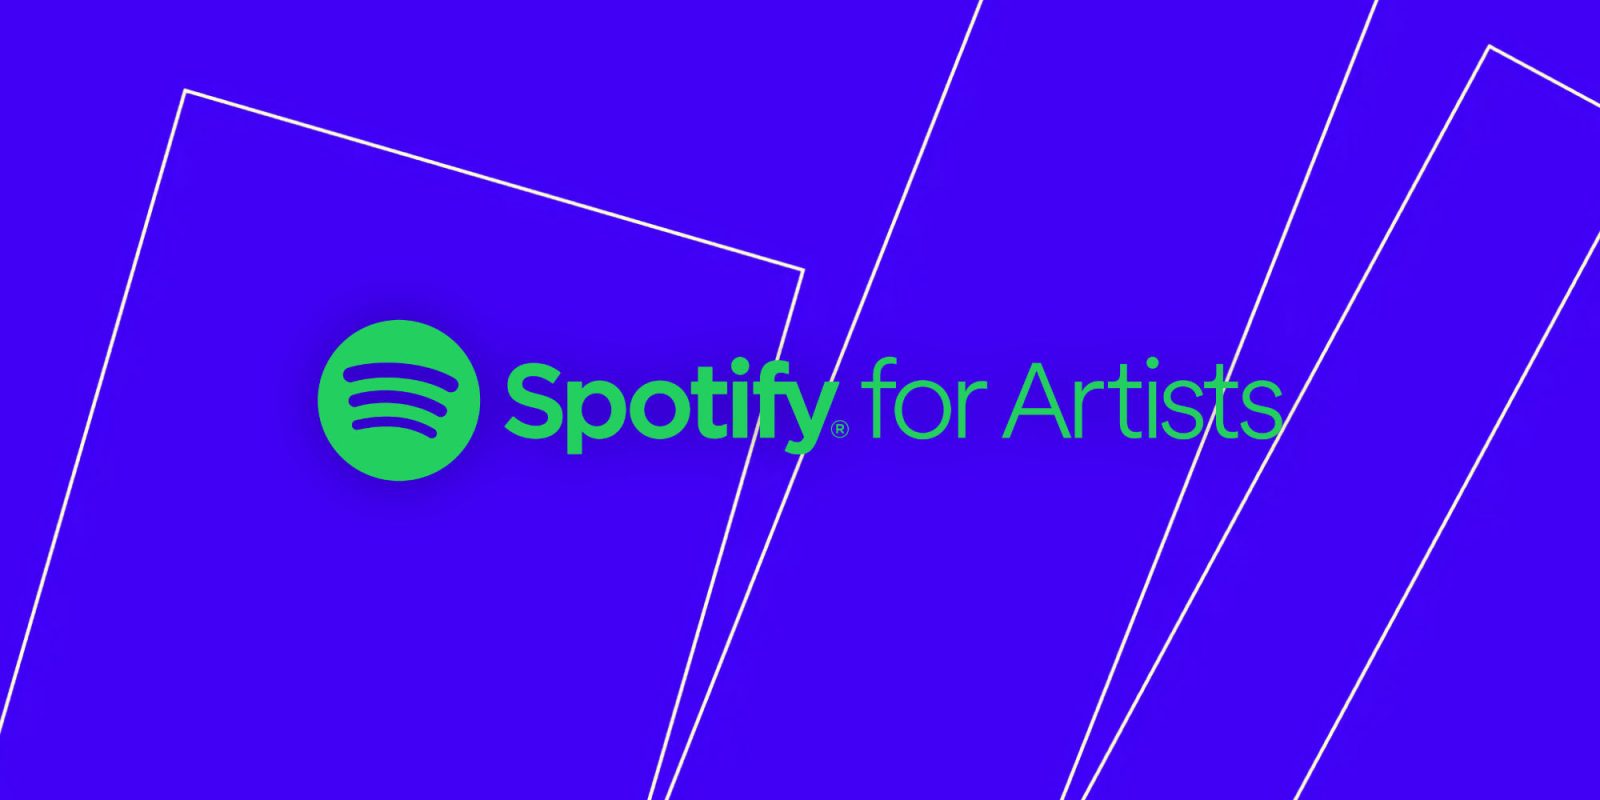 Spotify changes rules for paying artists seeking better payments for